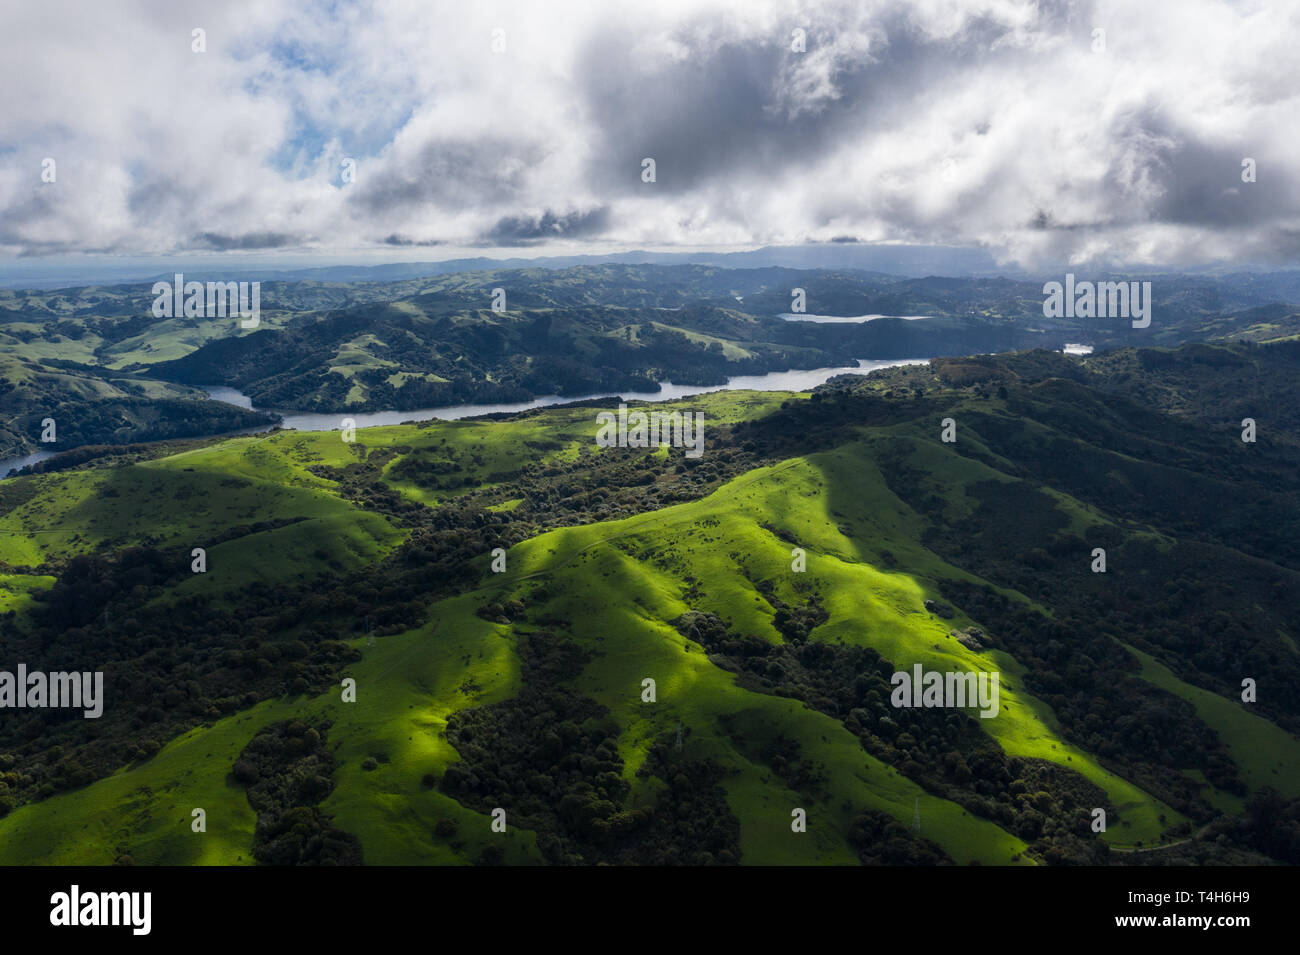 Morning light illuminates the hills surrounding San Francisco Bay. A wet winter has caused lush vegetation growth in the East Bay hills near Oakland. Stock Photo